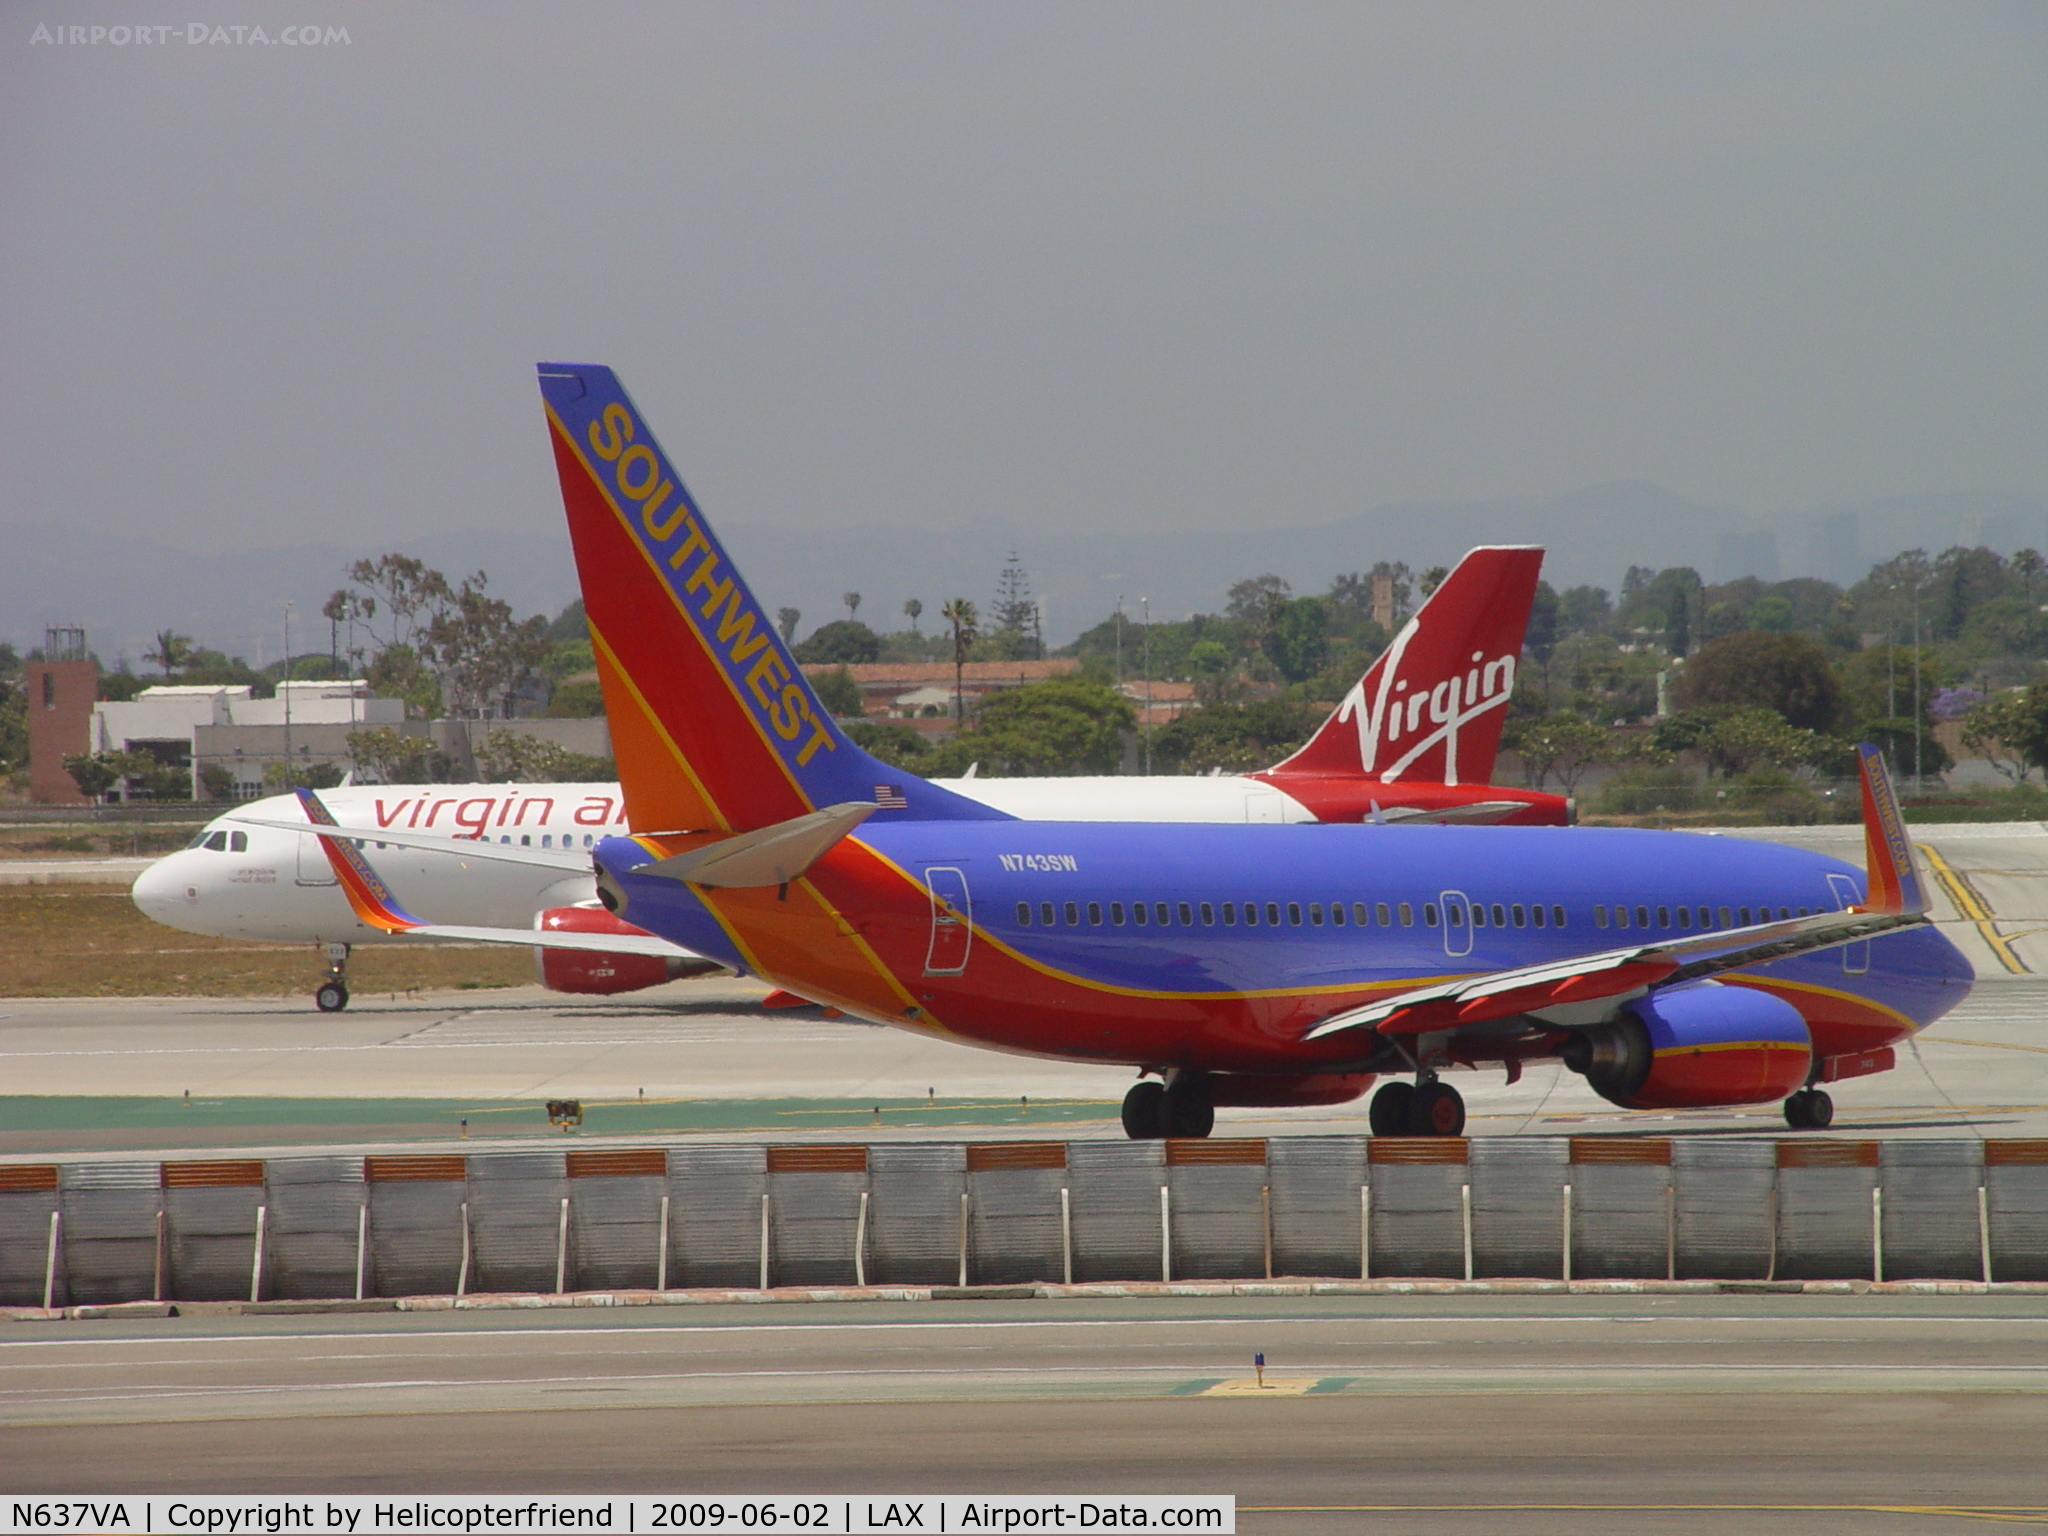 N637VA, 2008 Airbus A320-214 C/N 3465, Starting take off roll while Southwest moves into position